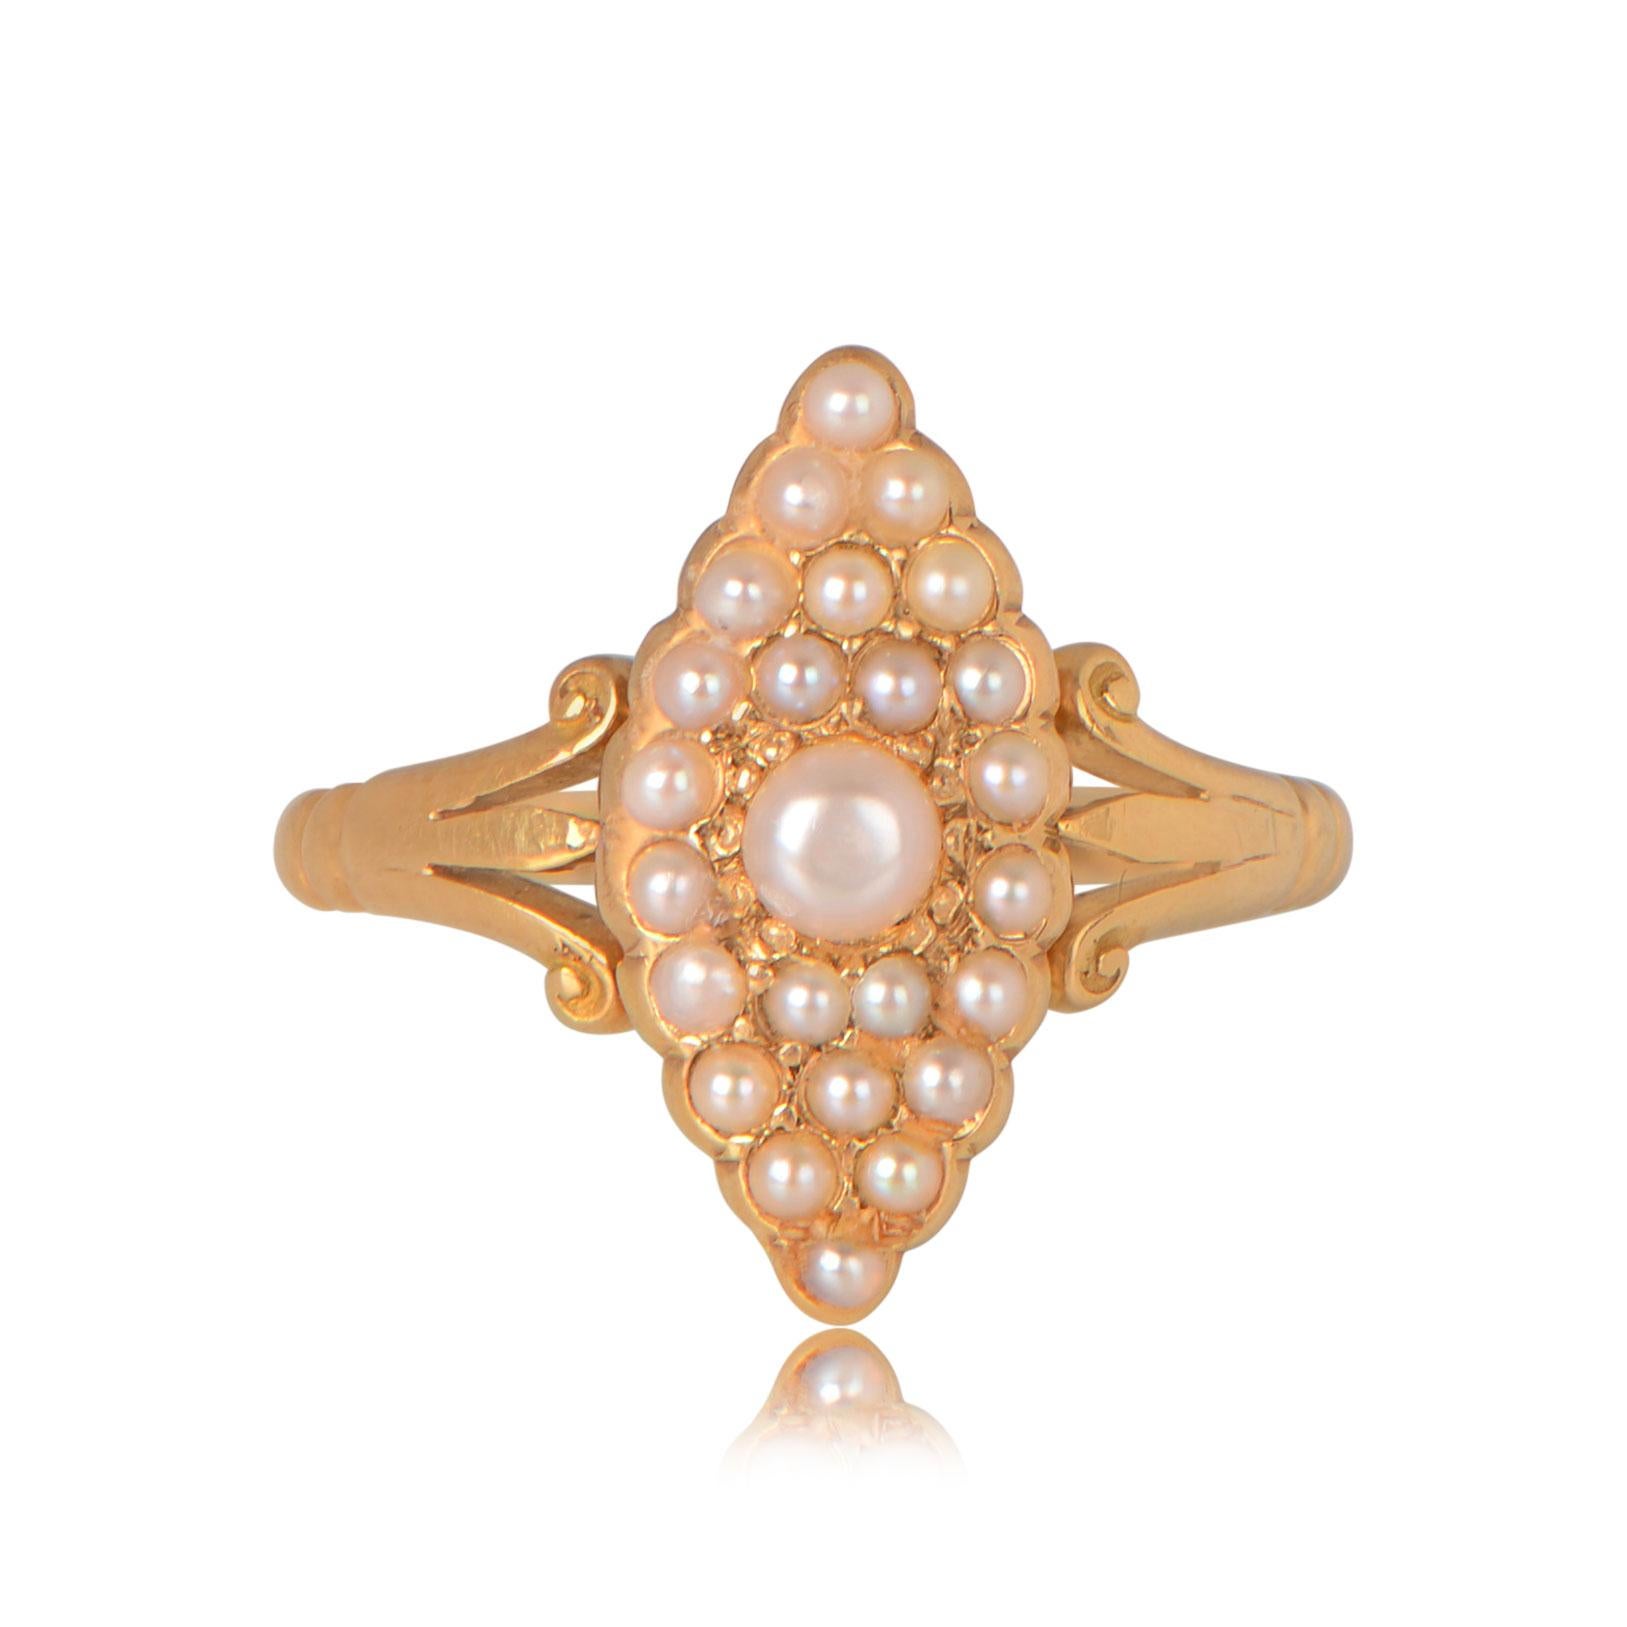 Antique Georgian Navette Ring: This captivating piece showcases a cluster of seed pearls in a navette design, capturing the essence of the era. Handcrafted in 18k yellow gold, this ring's timeless elegance dates back to approximately 1815.


Ring